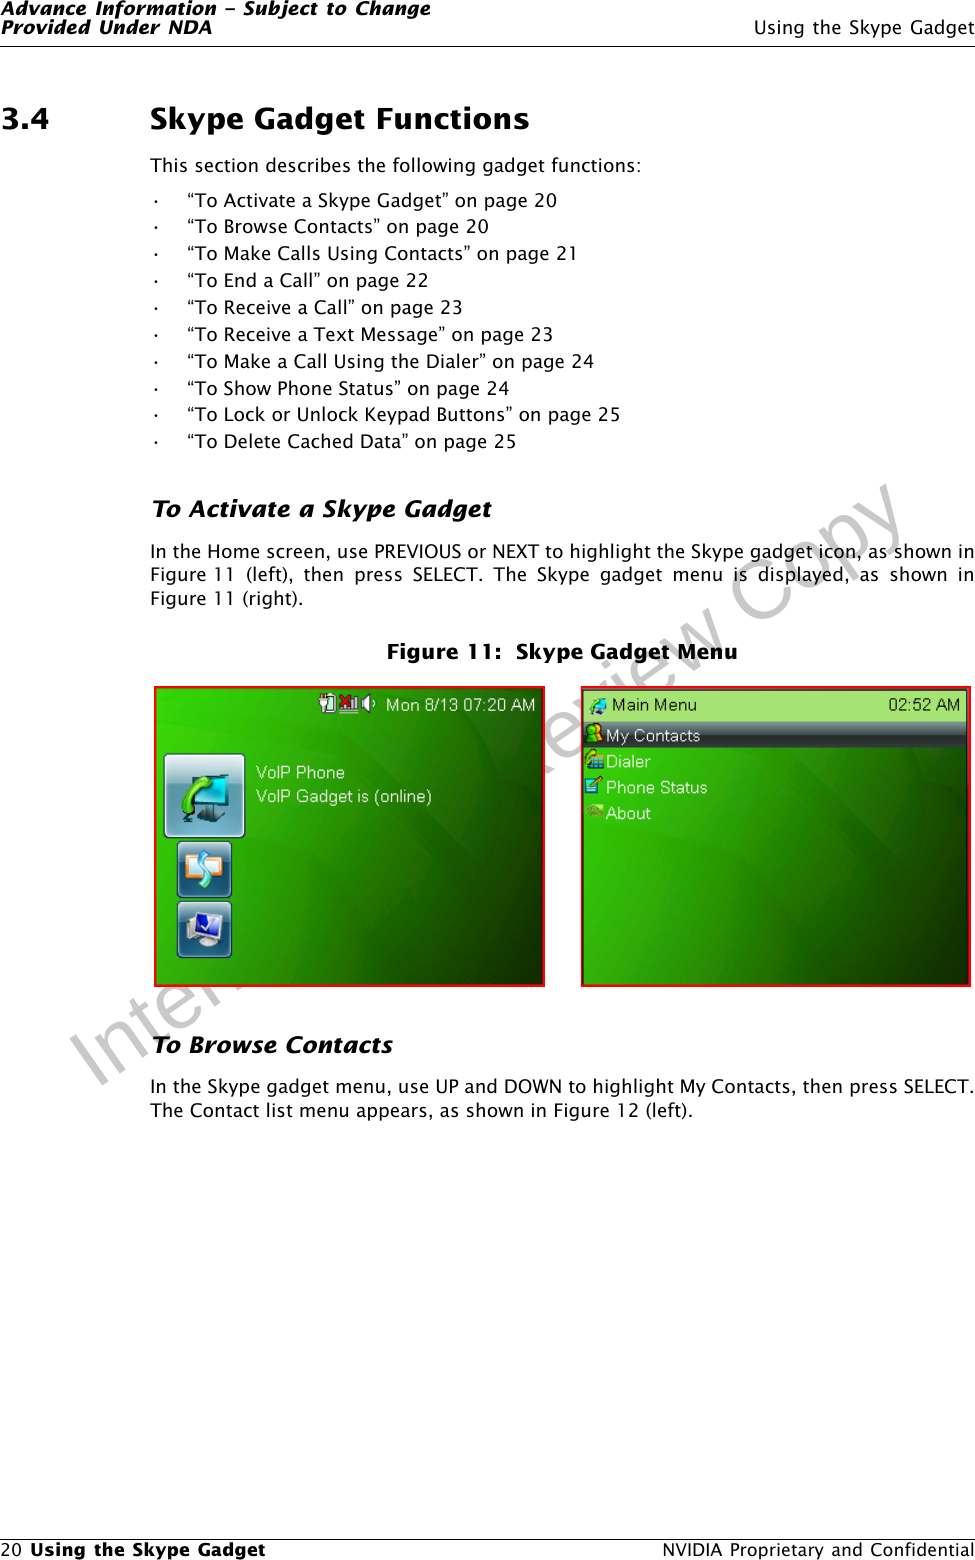 Advance Information – Subject to ChangeProvided Under NDA Using the Skype Gadget20 Using the Skype Gadget  NVIDIA Proprietary and ConfidentialInternal Draft Review Copy3.4 Skype Gadget FunctionsThis section describes the following gadget functions:• “To Activate a Skype Gadget” on page 20• “To Browse Contacts” on page 20• “To Make Calls Using Contacts” on page 21• “To End a Call” on page 22• “To Receive a Call” on page 23• “To Receive a Text Message” on page 23• “To Make a Call Using the Dialer” on page 24• “To Show Phone Status” on page 24• “To Lock or Unlock Keypad Buttons” on page 25• “To Delete Cached Data” on page 25To Activate a Skype GadgetIn the Home screen, use PREVIOUS or NEXT to highlight the Skype gadget icon, as shown inFigure 11 (left), then press SELECT. The Skype gadget menu is displayed, as shown inFigure 11 (right).Figure 11:  Skype Gadget MenuTo Browse ContactsIn the Skype gadget menu, use UP and DOWN to highlight My Contacts, then press SELECT.The Contact list menu appears, as shown in Figure 12 (left).